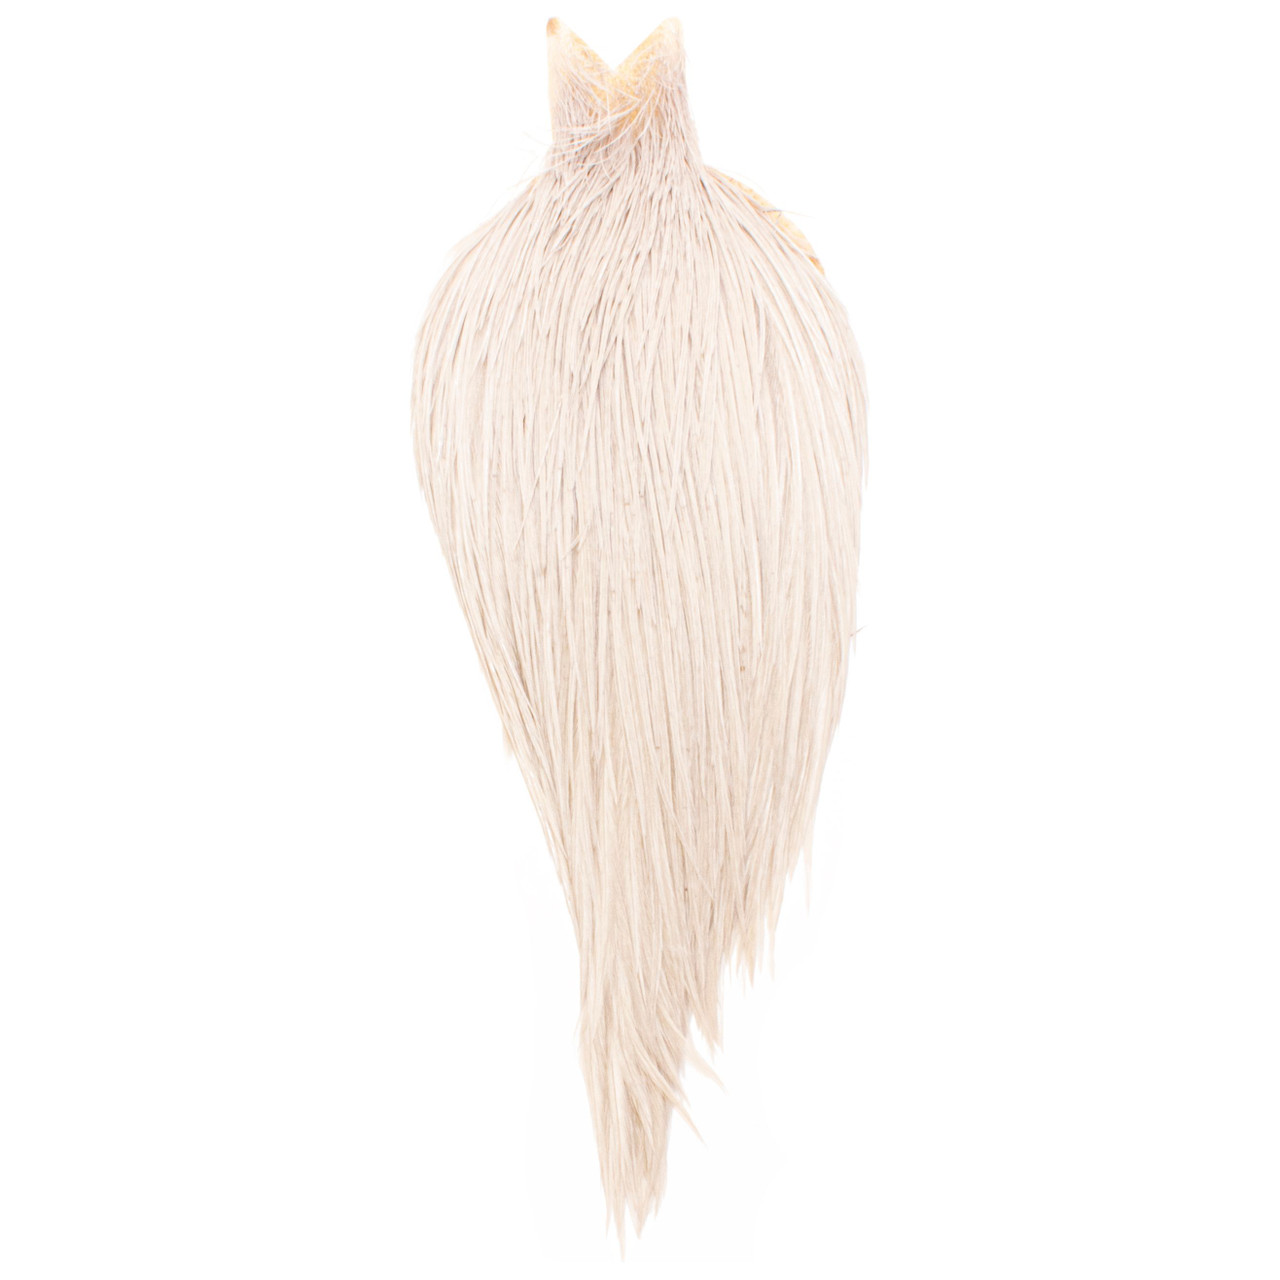 Whiting Farms High & Dry Hackle Cape - Hunter Banks Fly Fishing